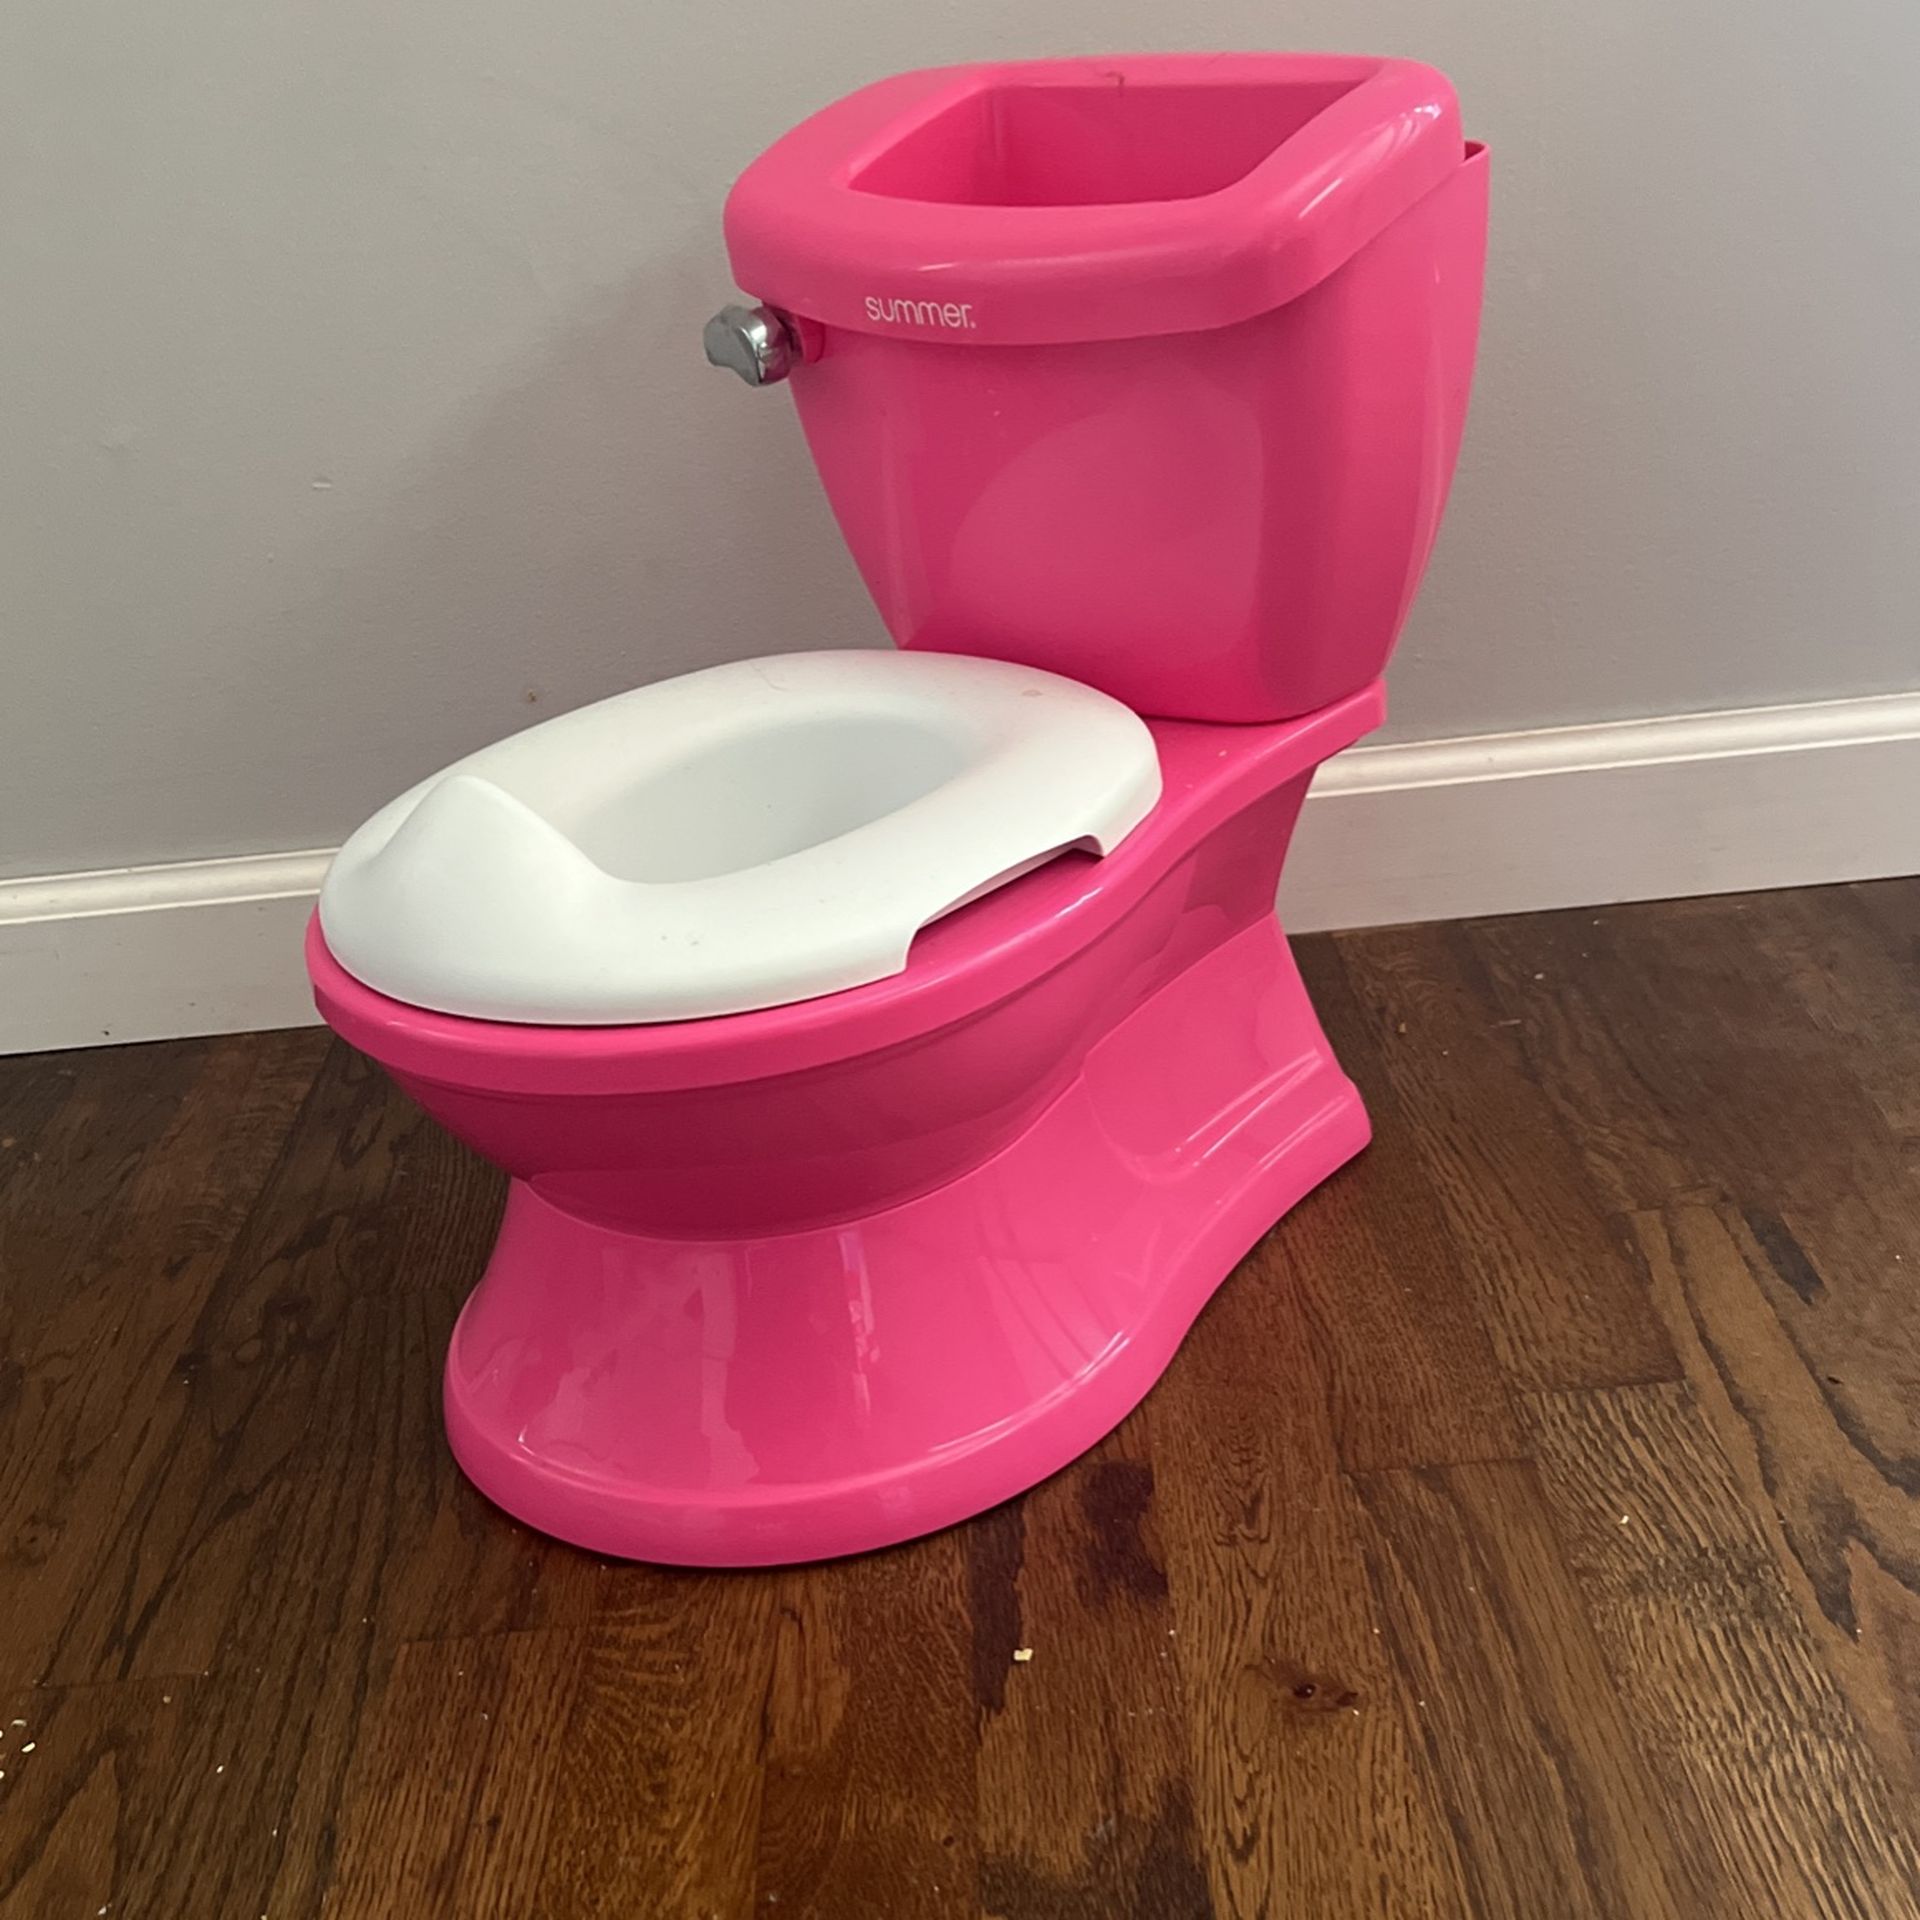 Kids Potty Chair Never Used 